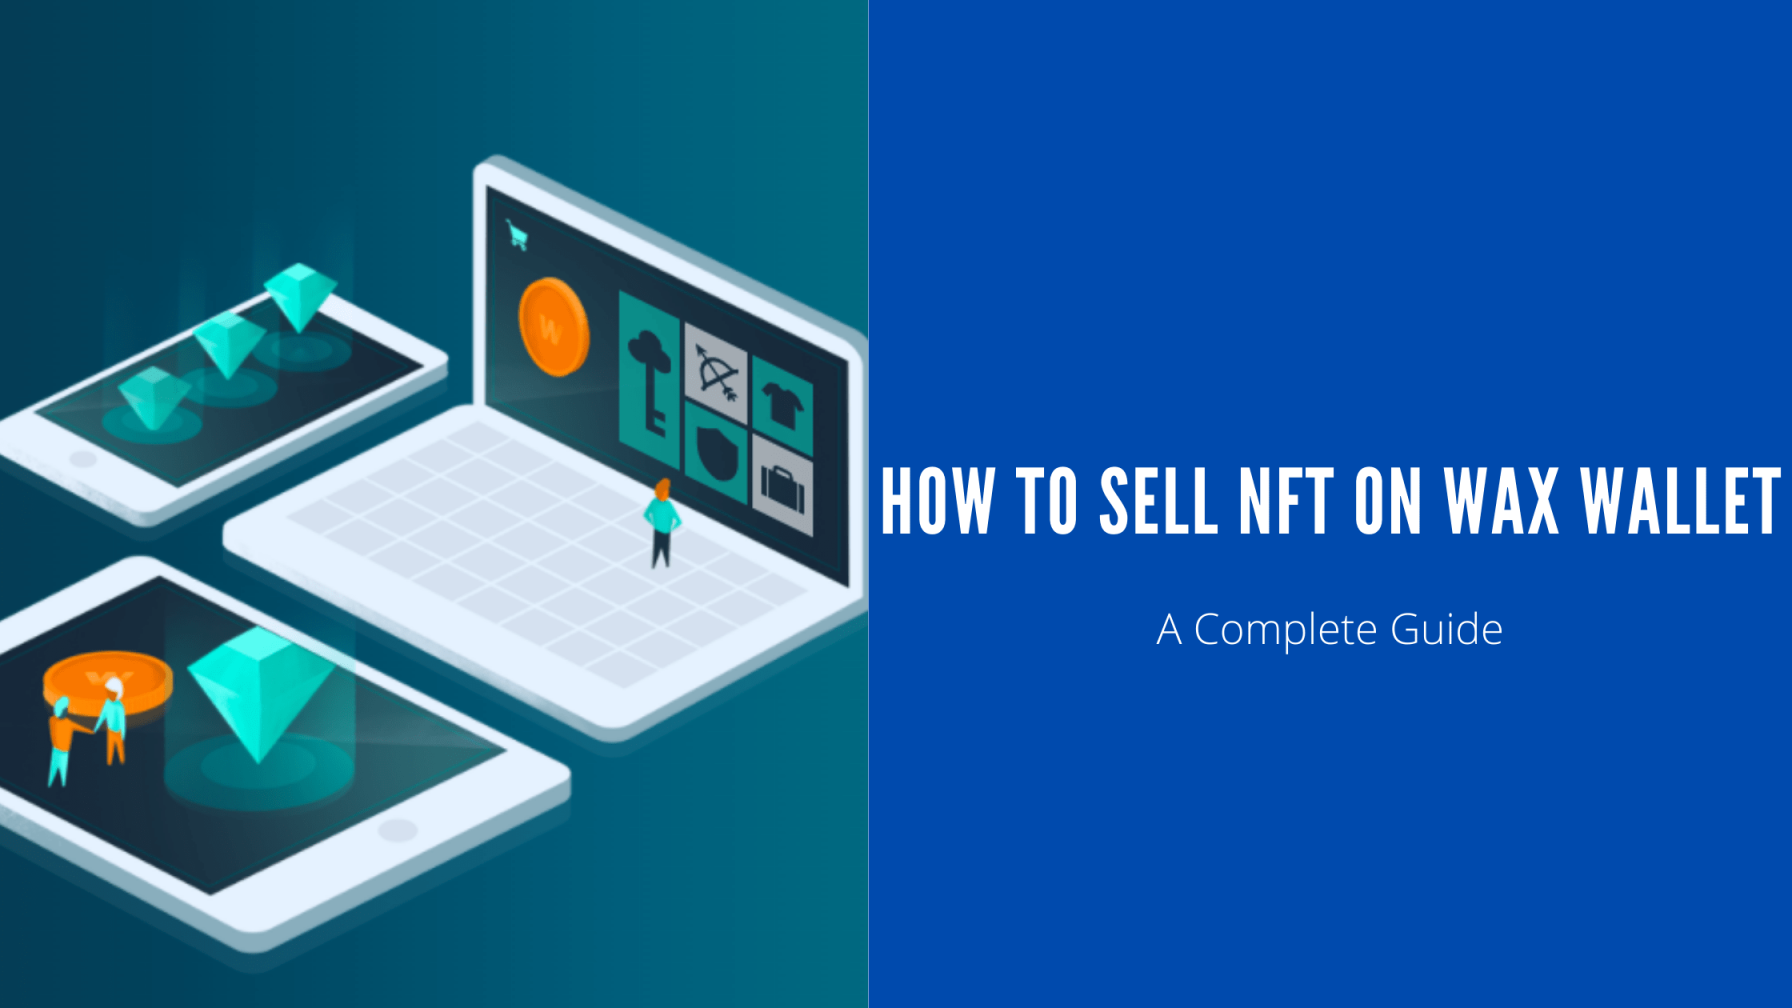 How To Sell NFT On Wax Wallet - How To Sell NFT On Wax Wallet: A Complete Guide